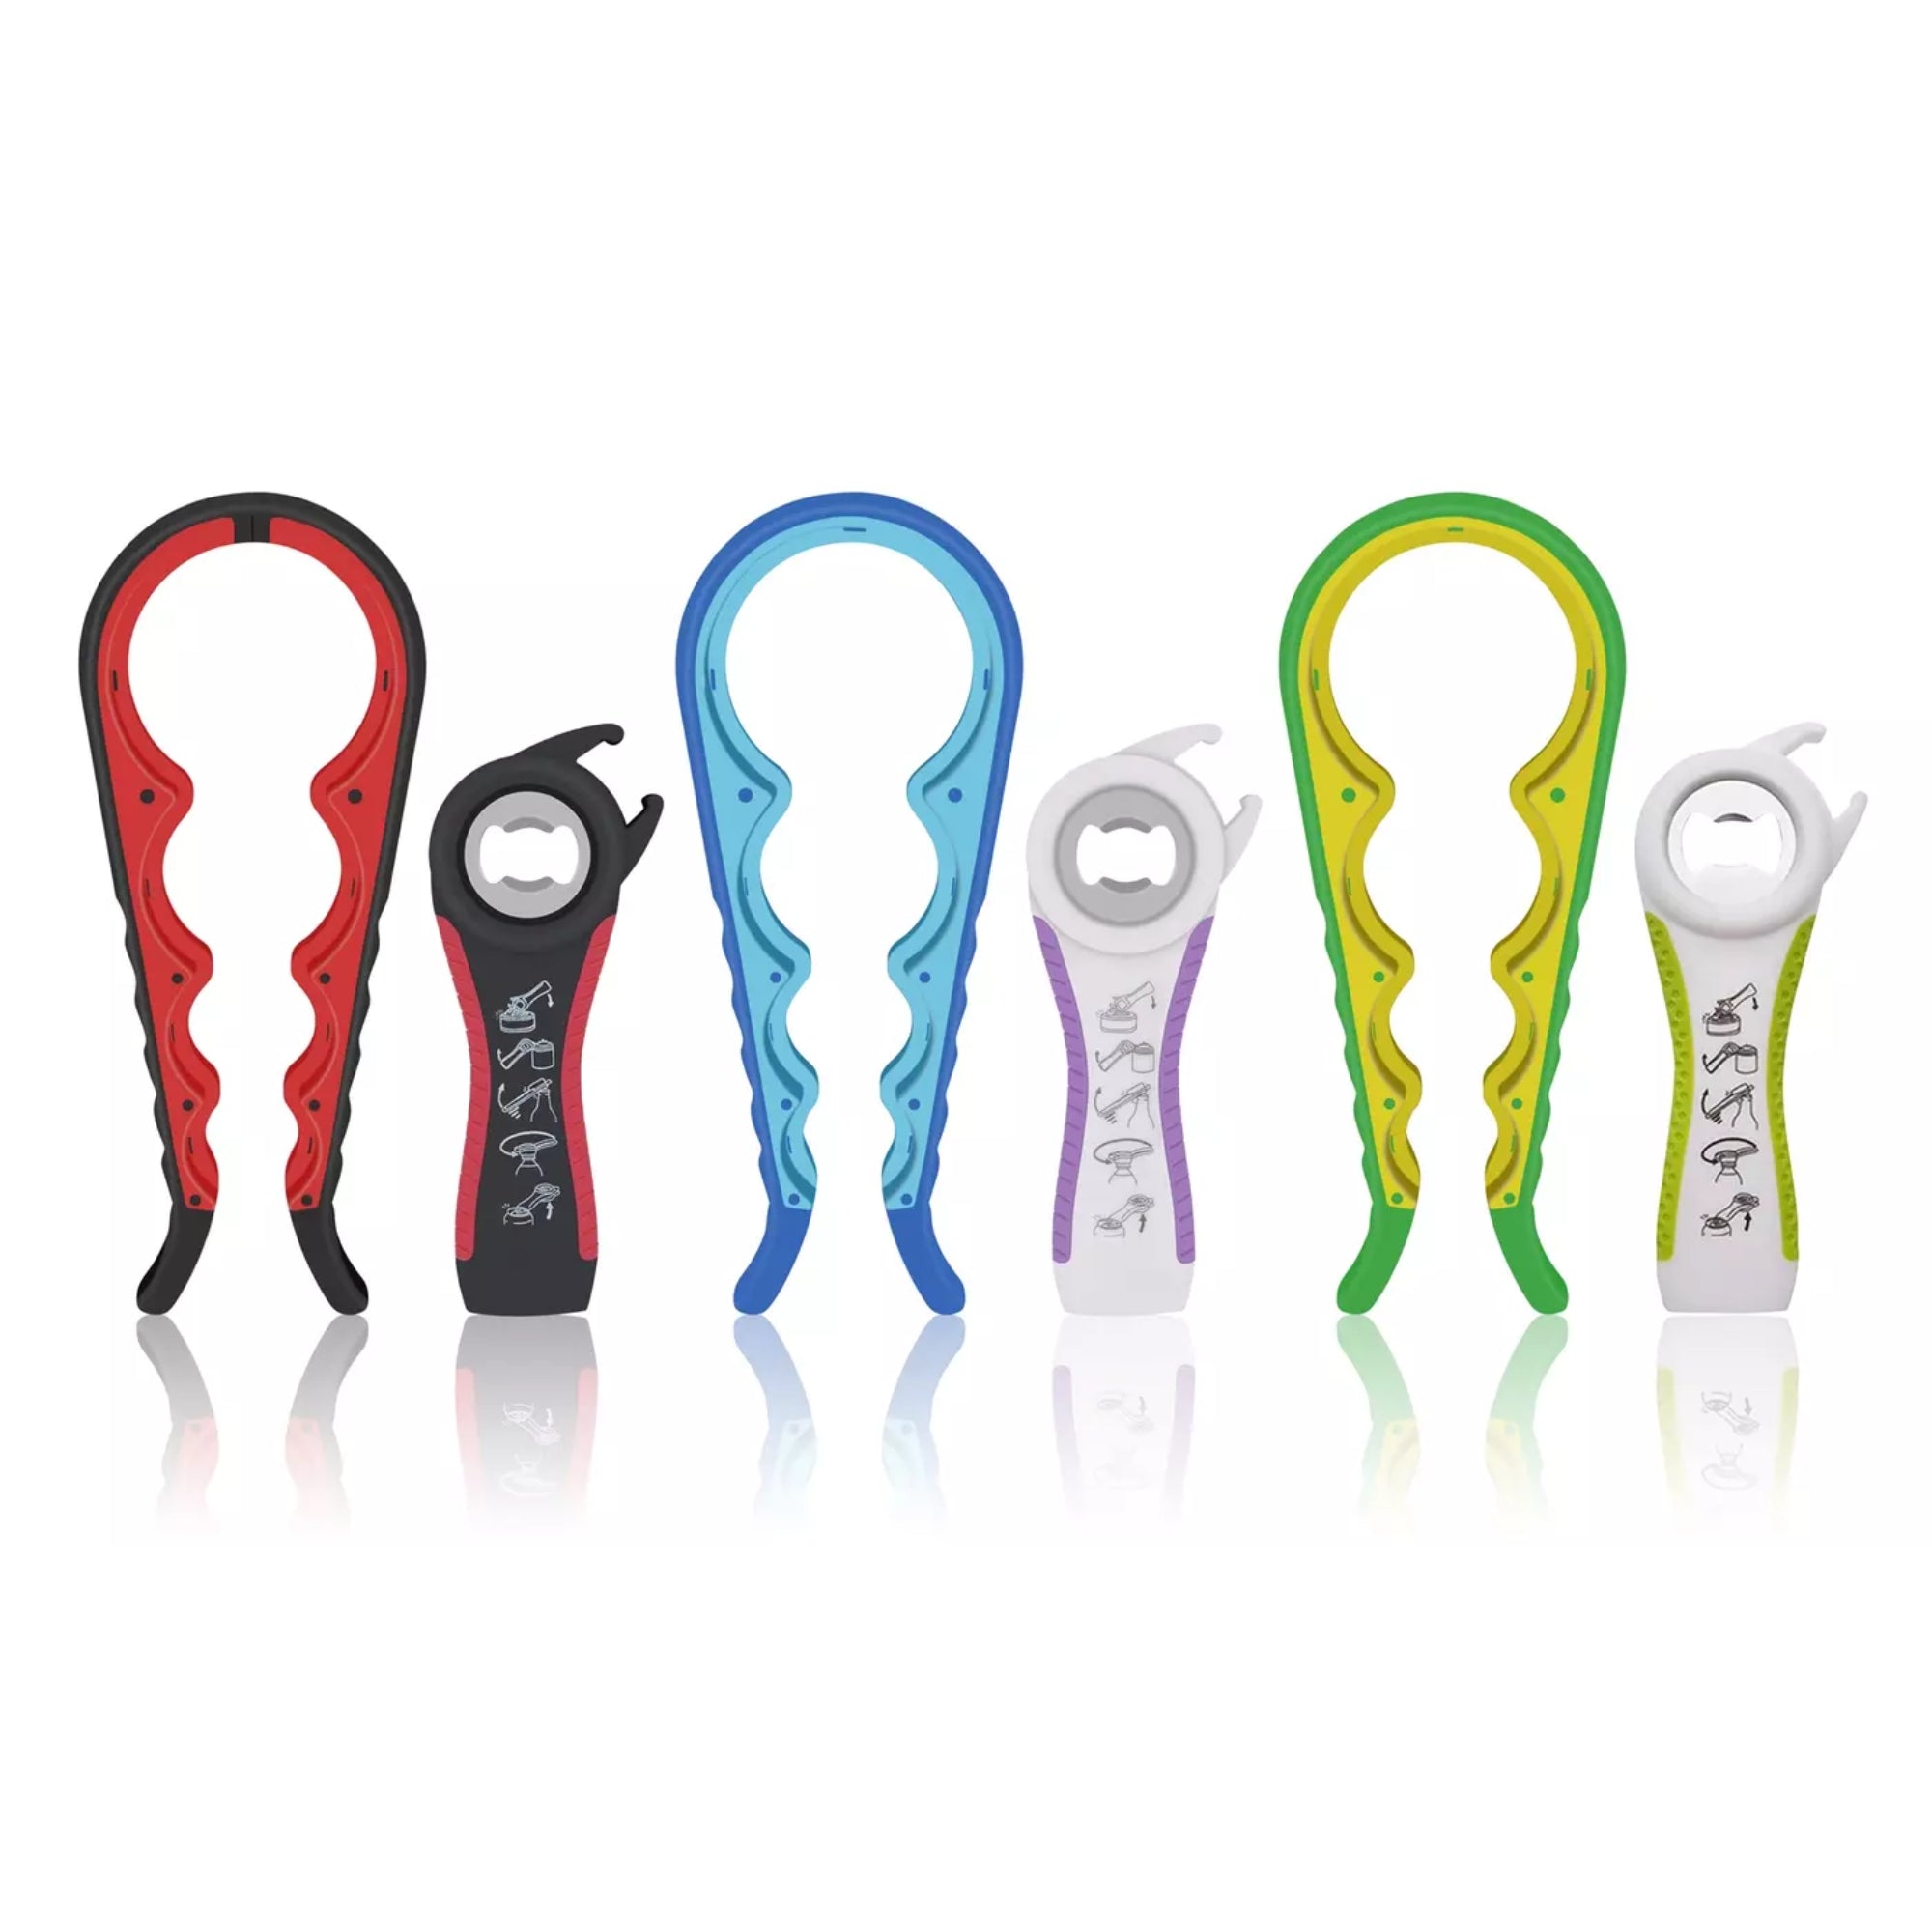 5 in 1 Multi-Function Can and Bottle Opener Tools